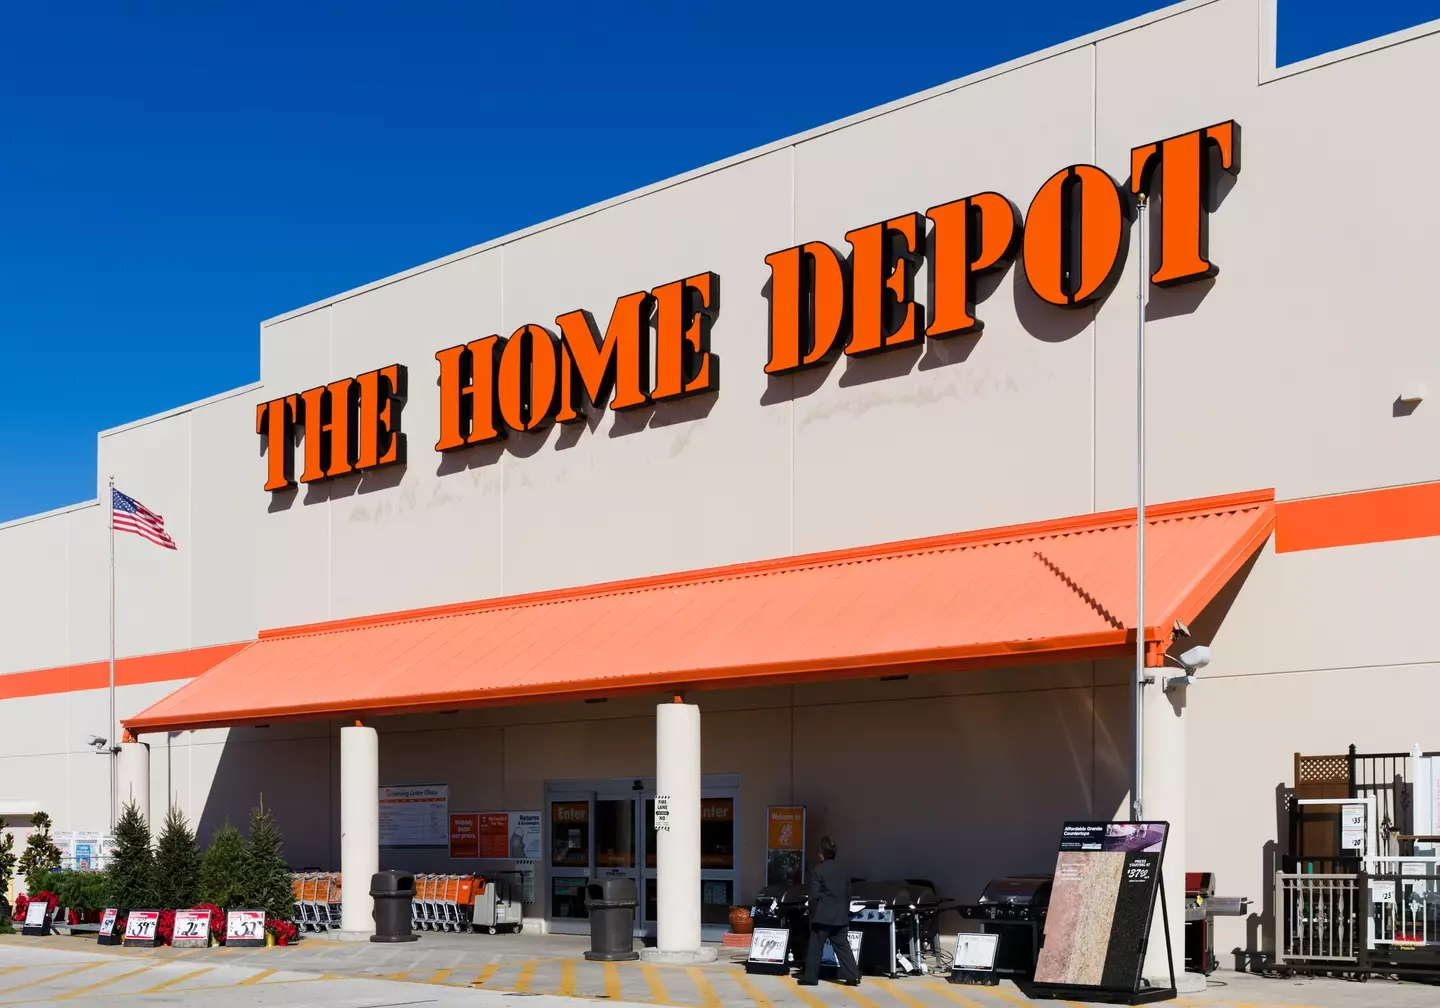 Rasor worked at the Home Depot for 'over nine years' according to a spokesperson for the store.